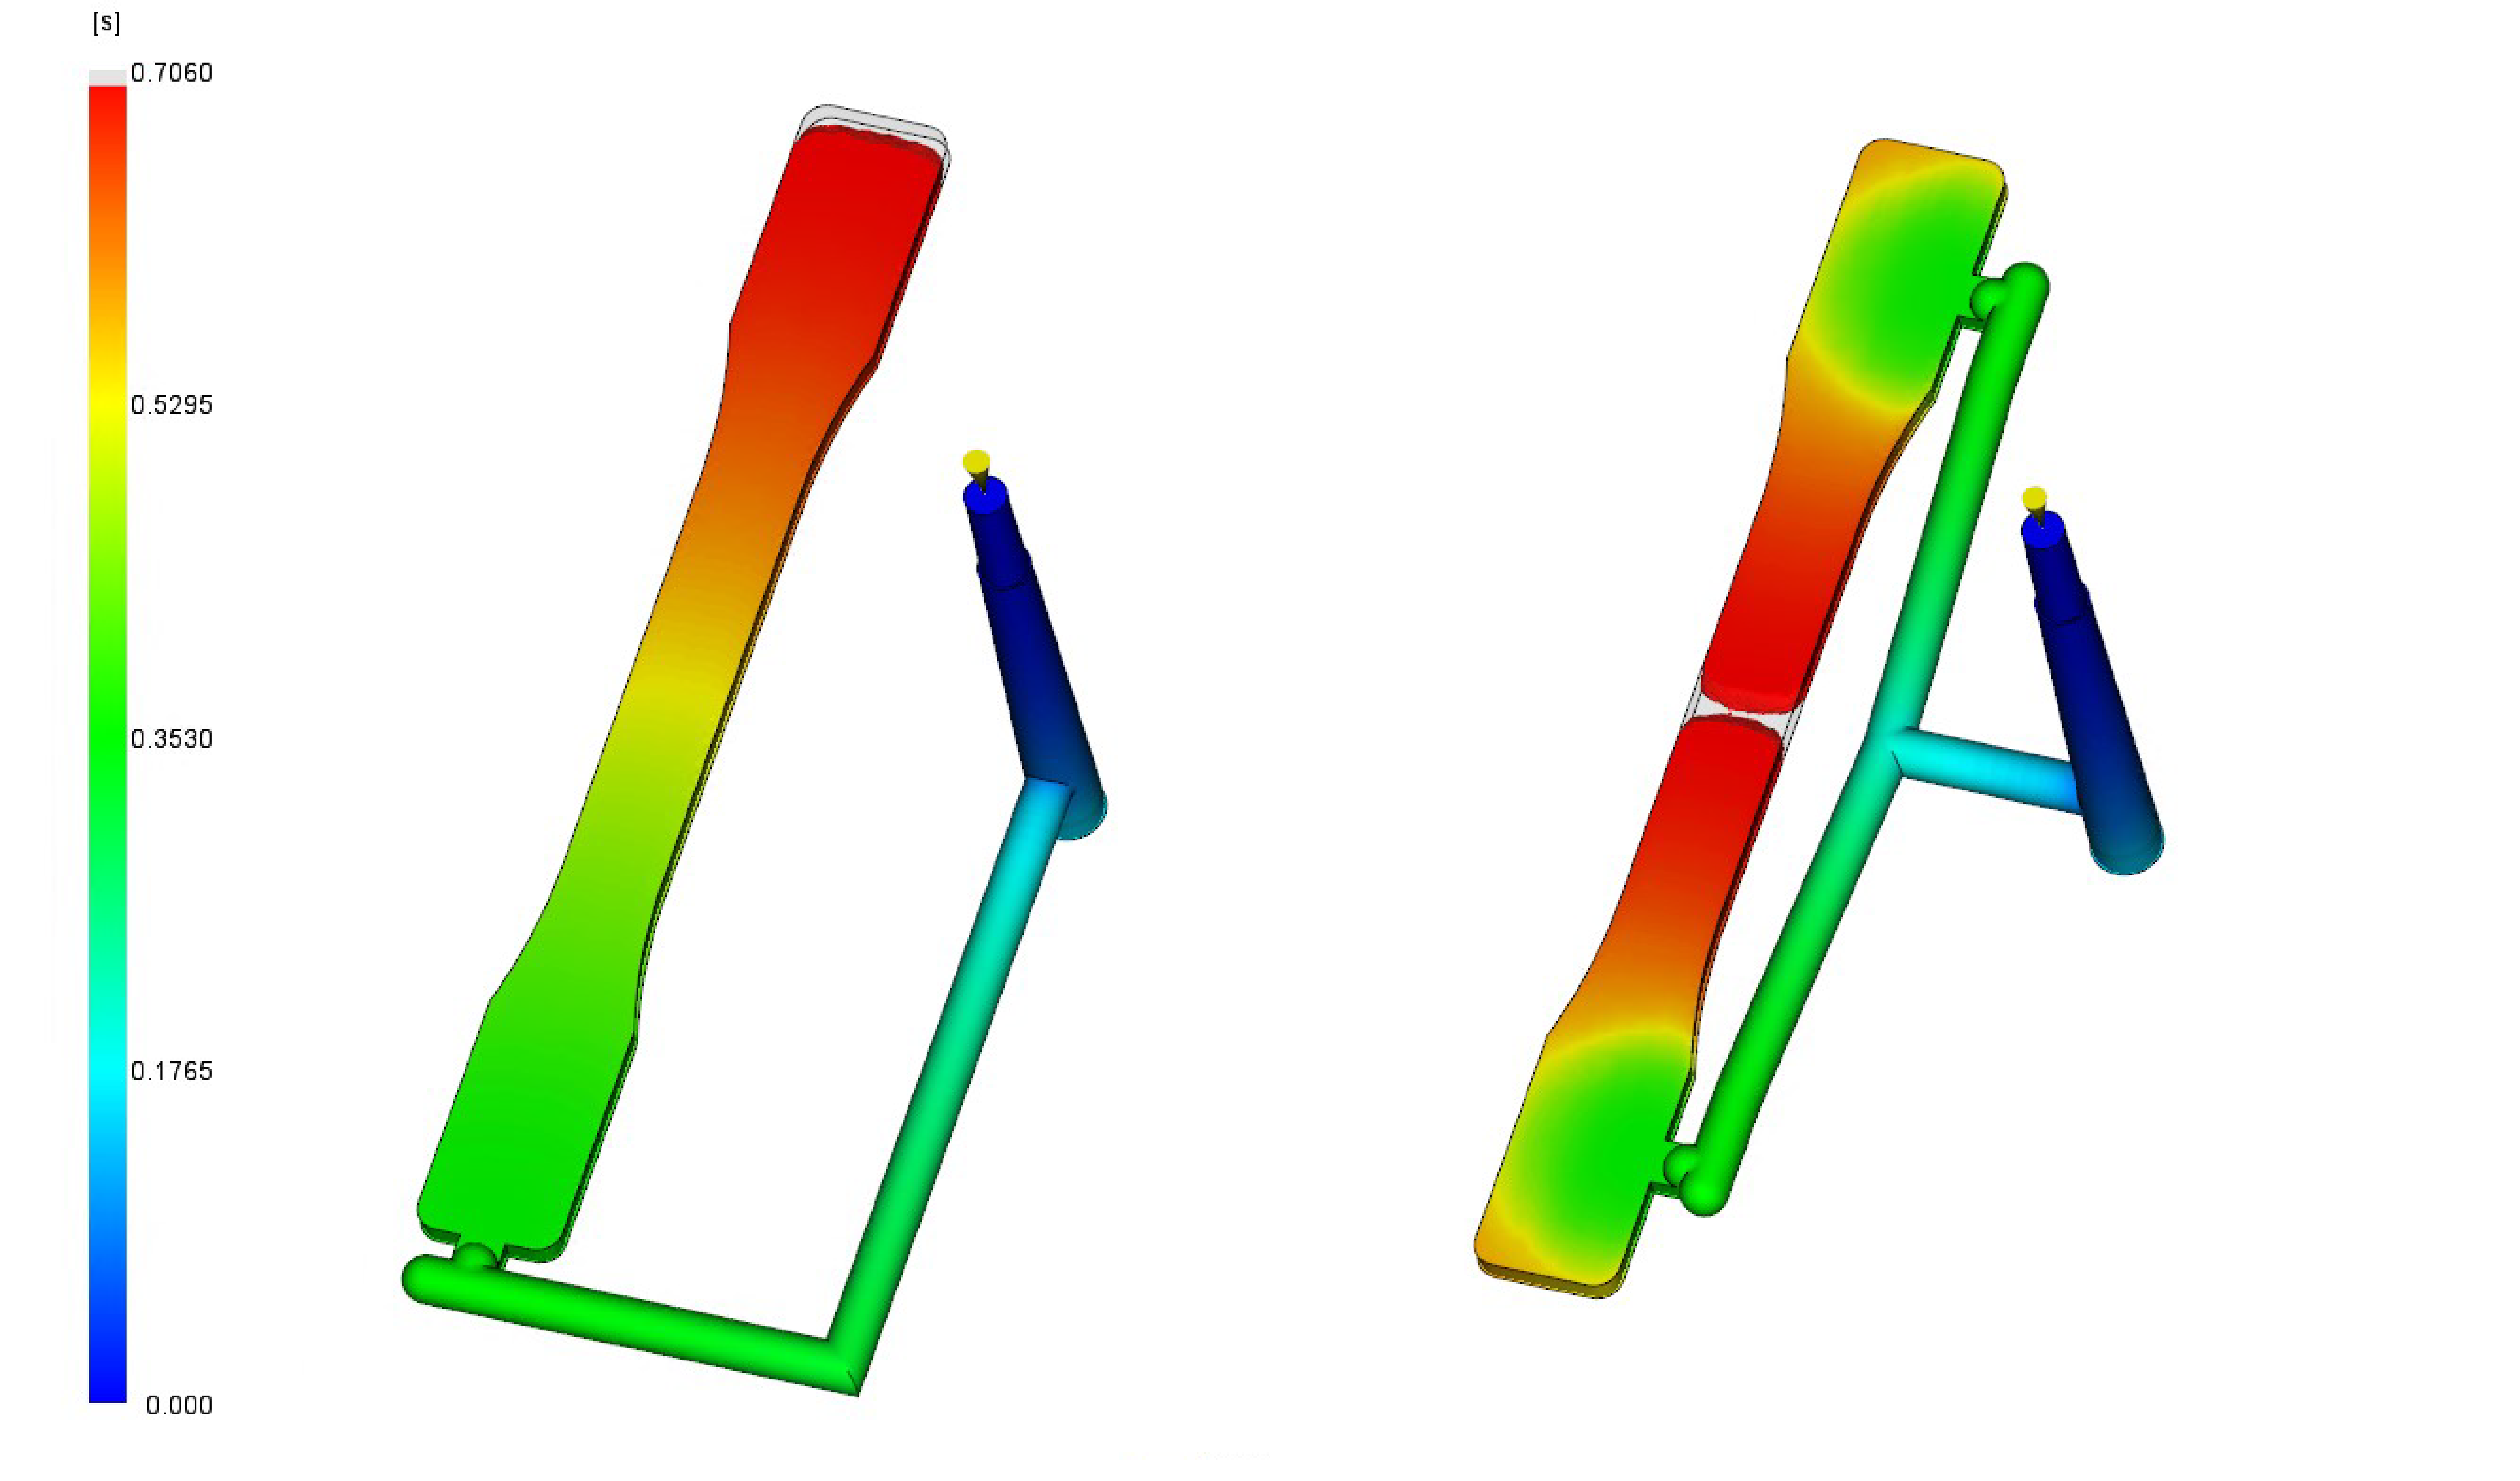 Figure 1. Mold filling simulation of molding single and dual gate sample
geometries. Color gradients represent fill time, the time taken to flow
material to part during molding.